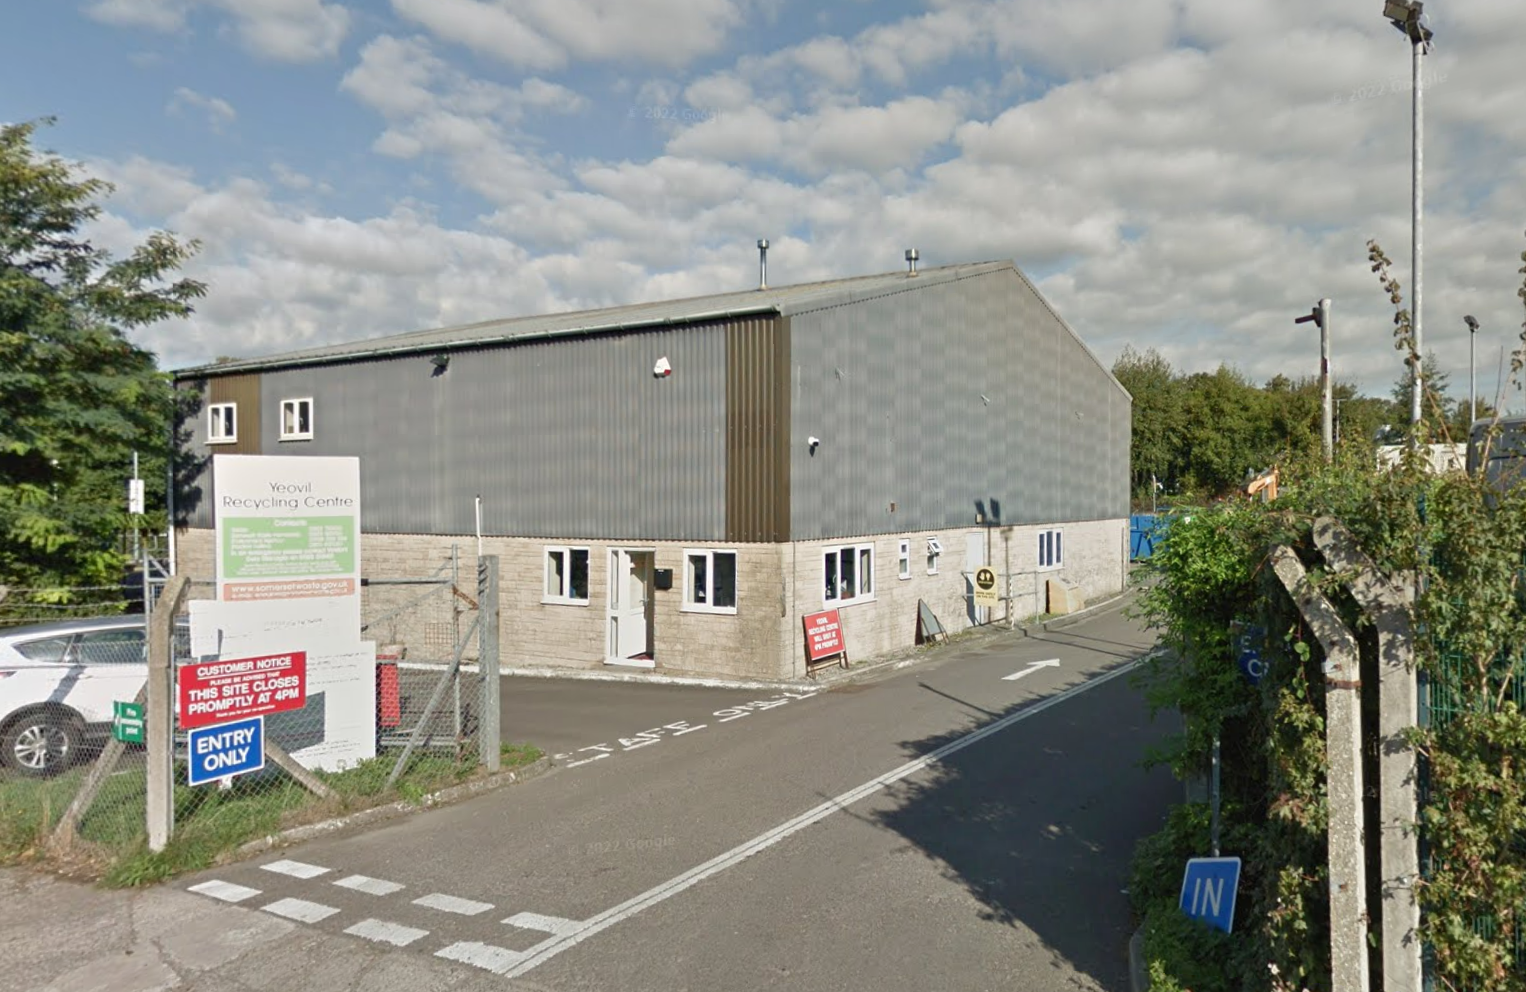 The baby’s body was found at a facility on Lufton Trading Estate